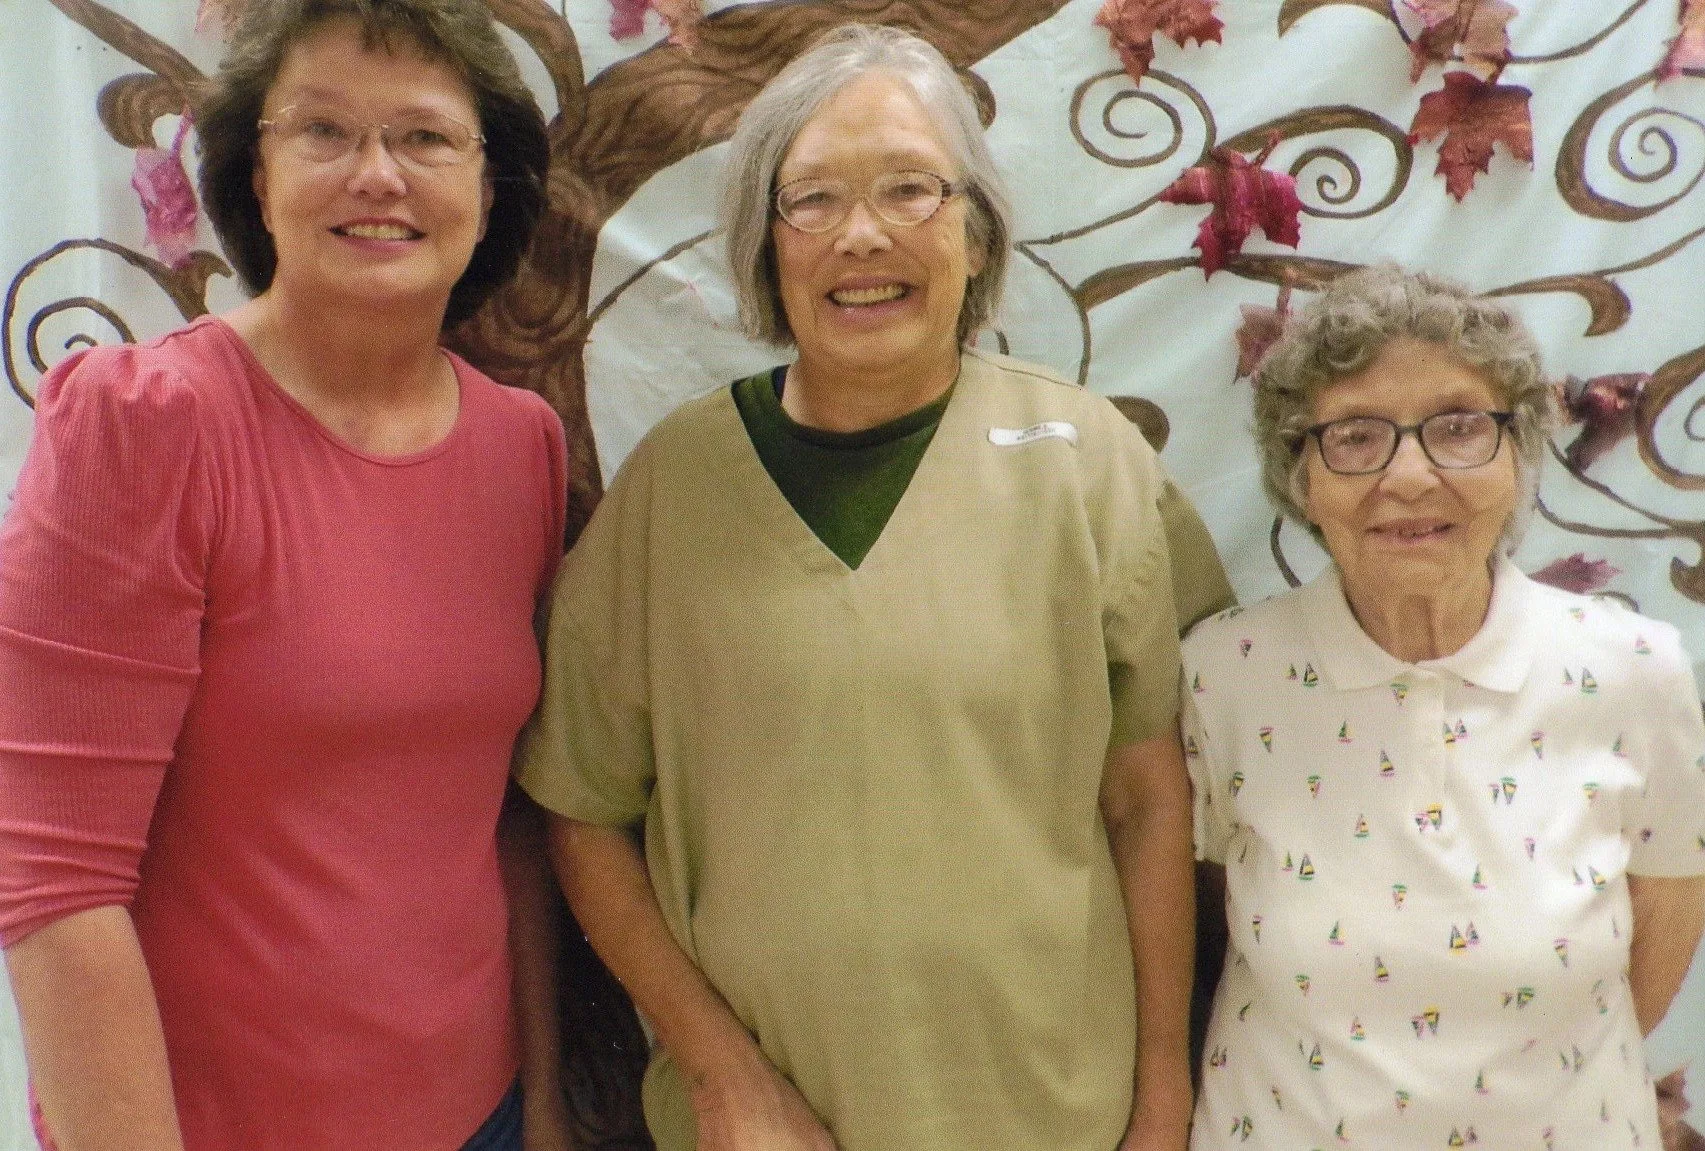 Sandra Hemme (center) with her sister and mother. (Image: Courtesy of the Hemme family)